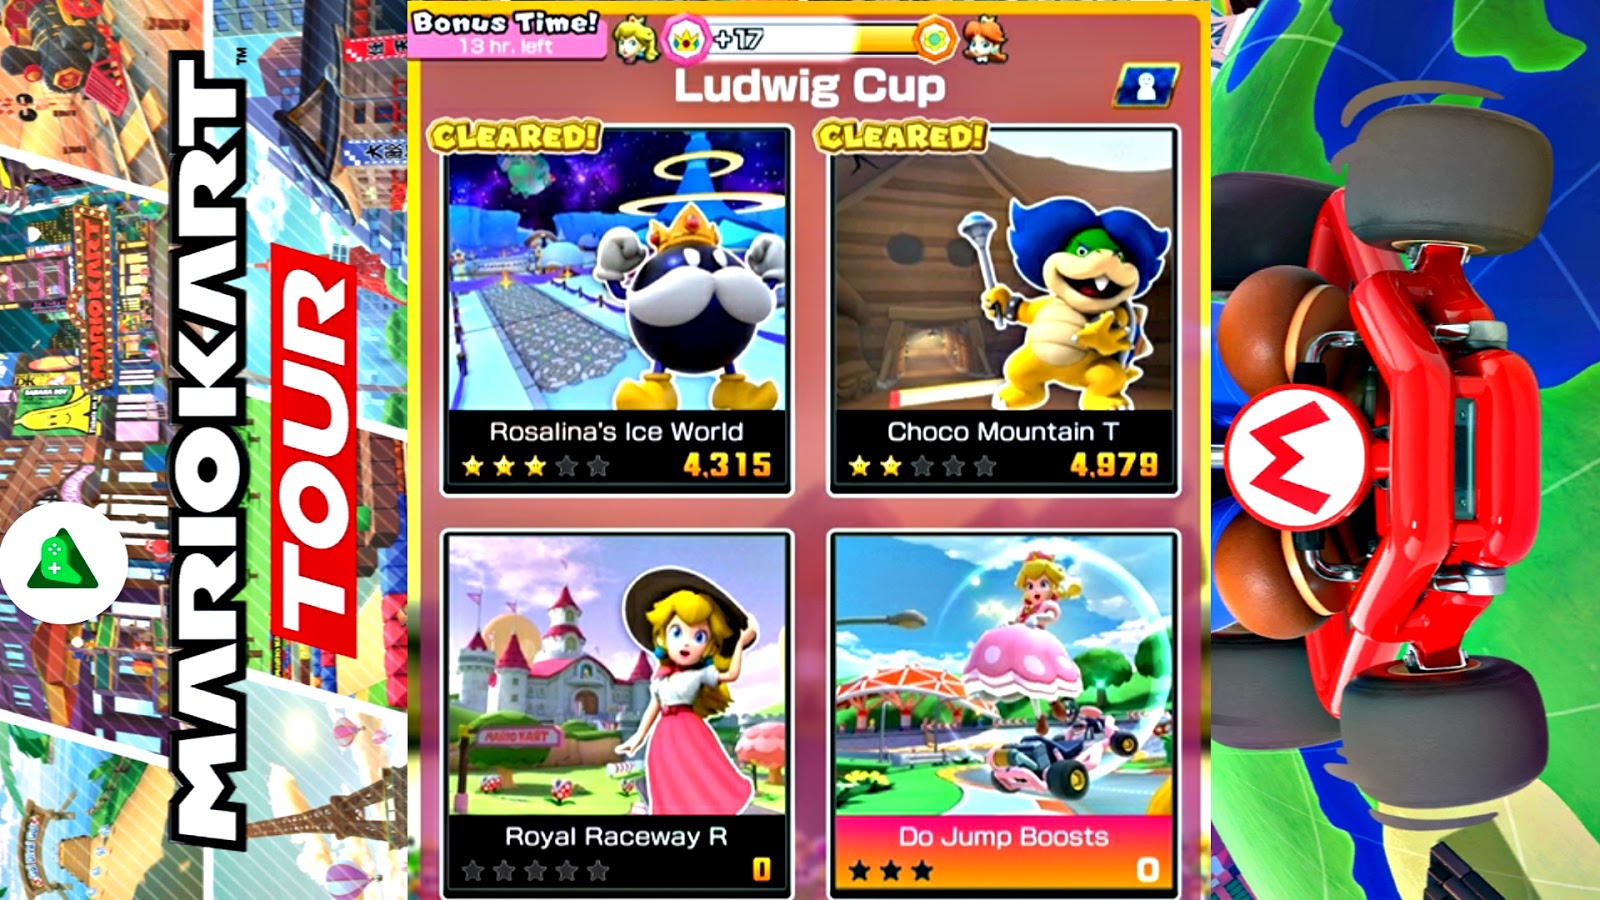 Mario Kart Tour Mod Apk is coming back with some great and